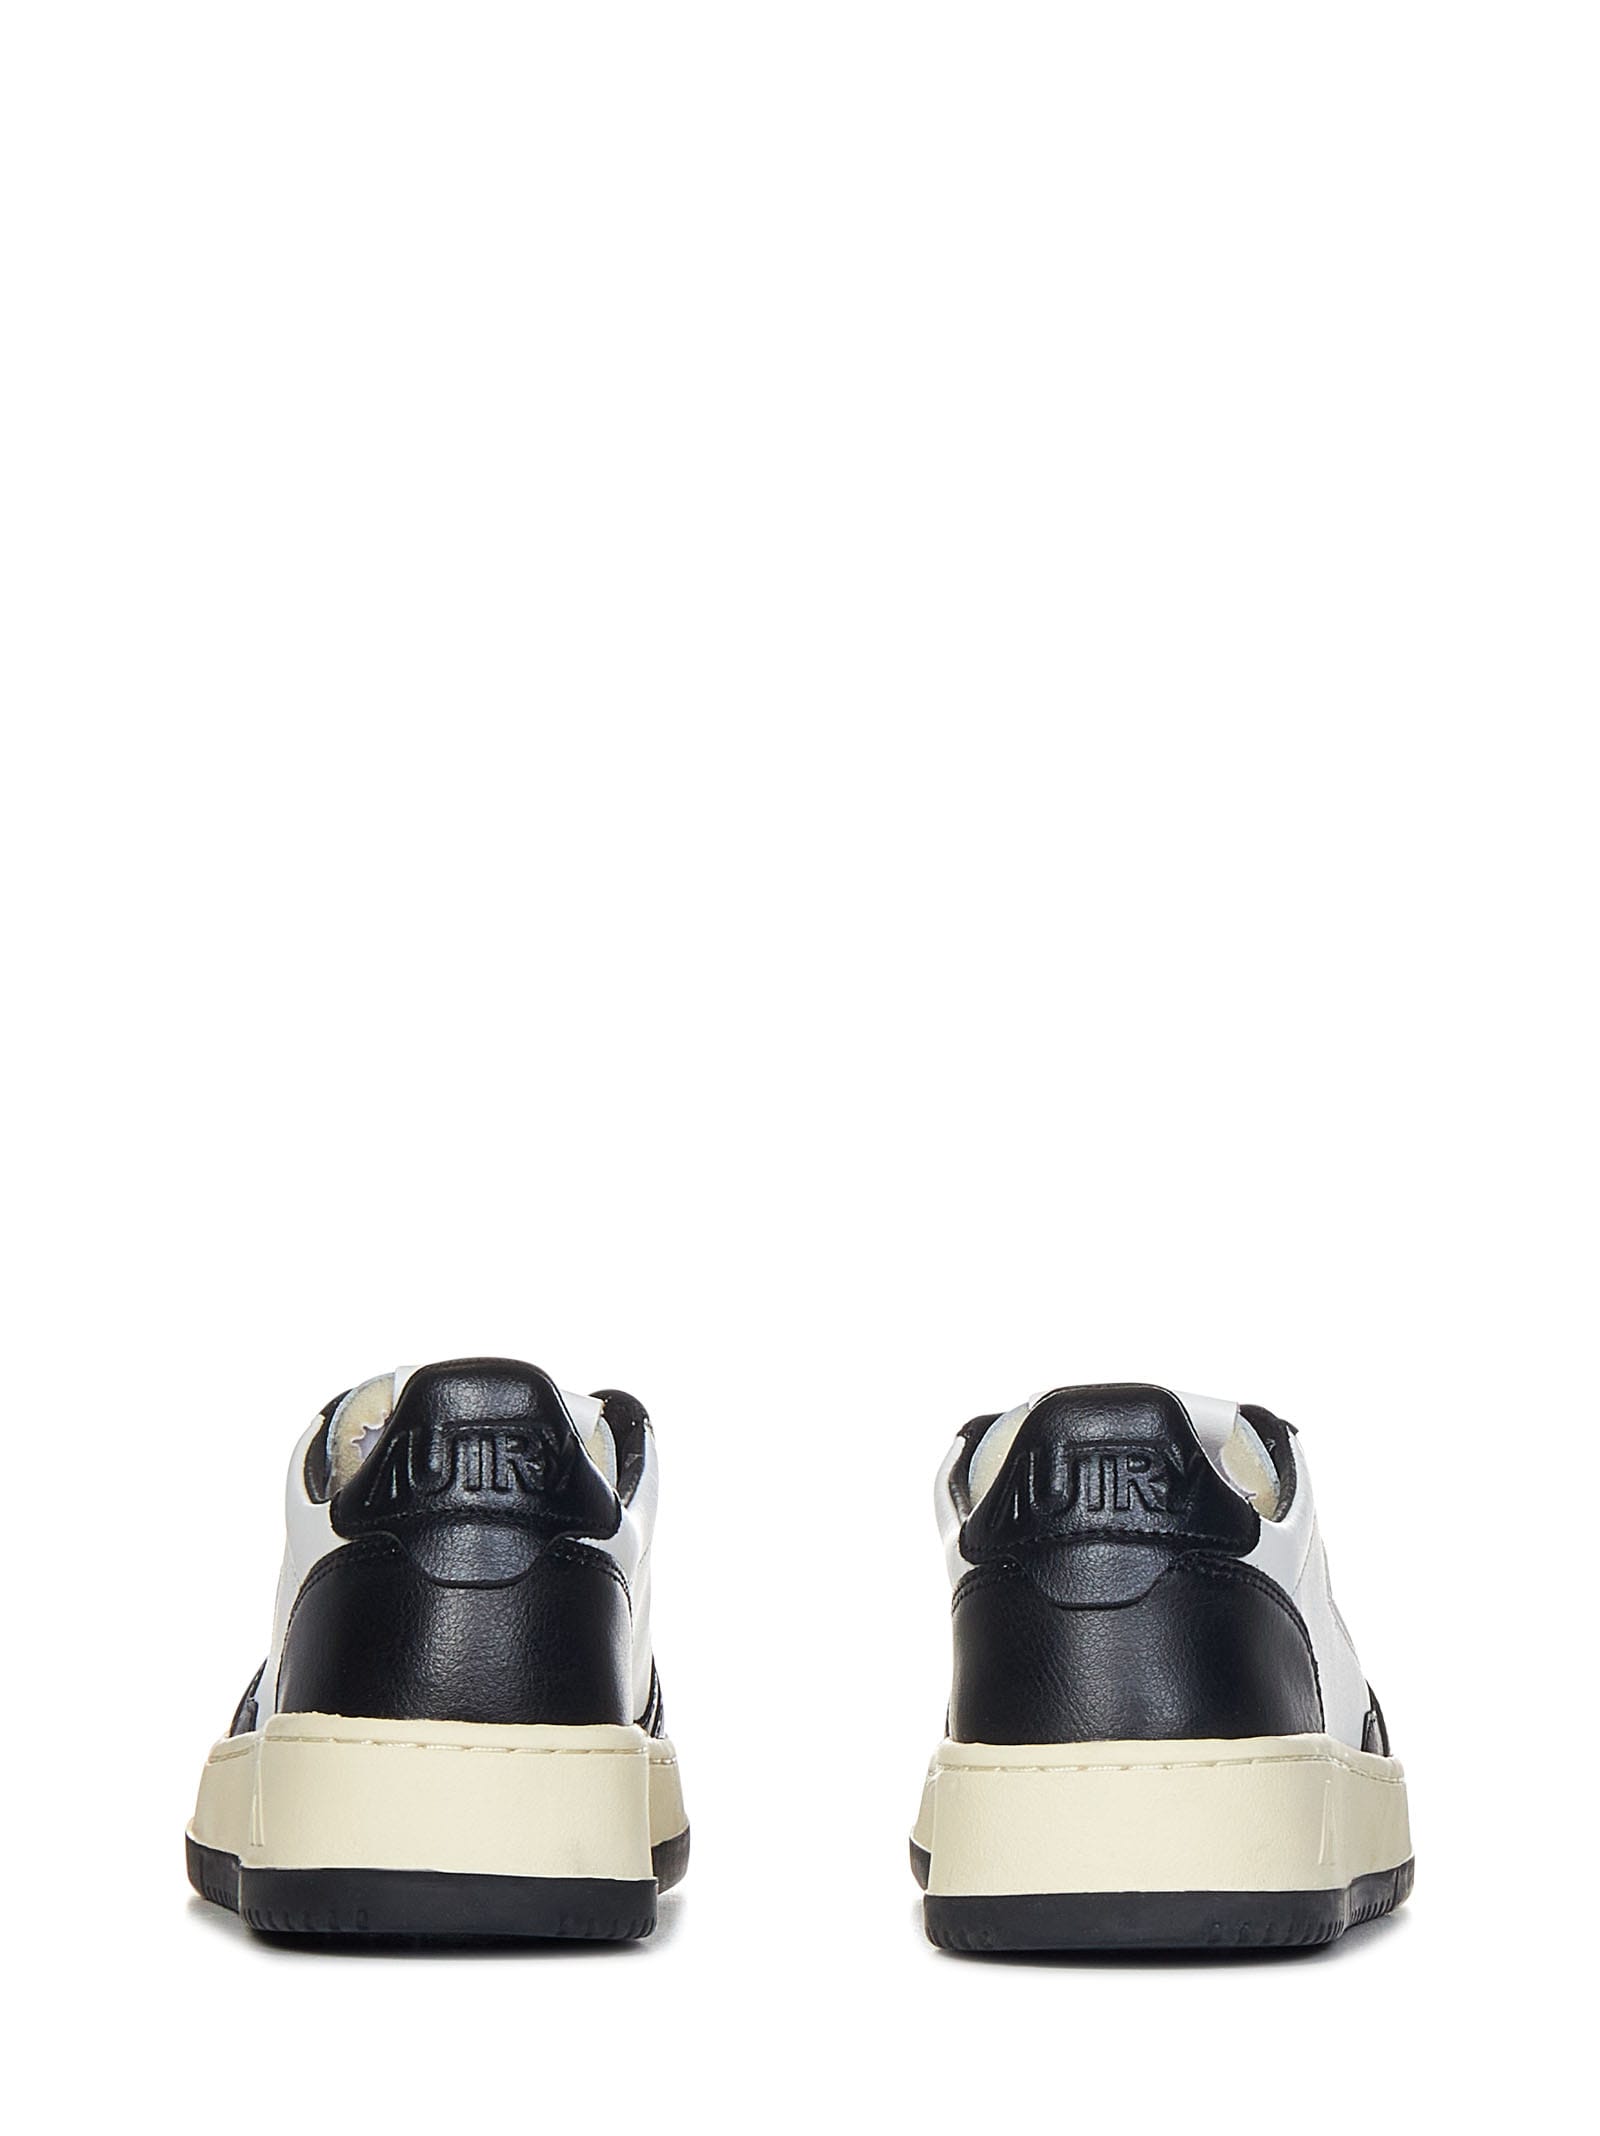 Shop Autry Medalist Low Sneakers In Bianco+lilla